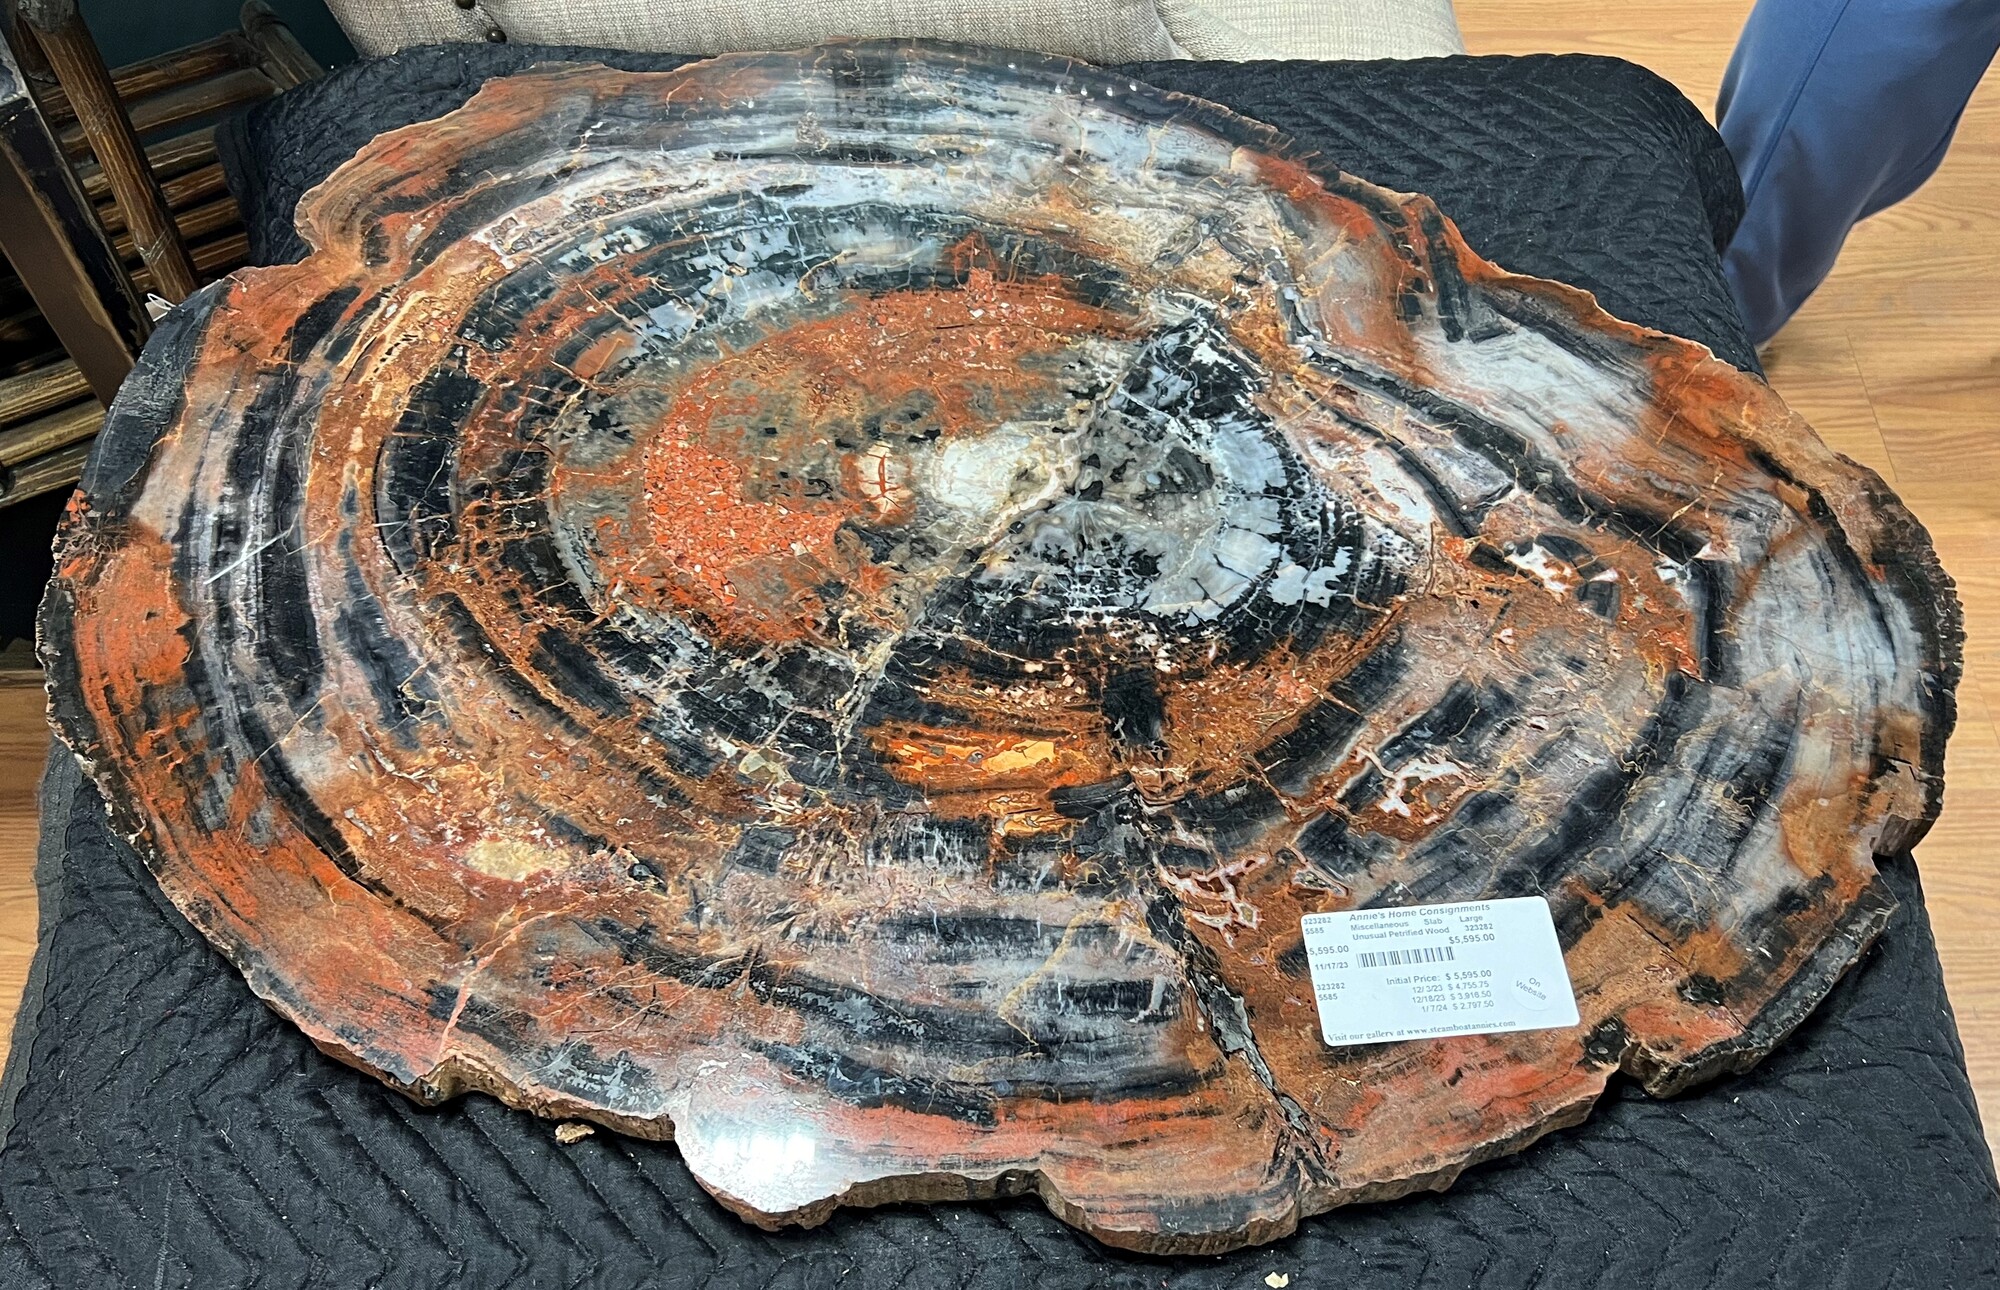 Unusual Petrified Wood, Slab, Large
34in x 26in (approx)